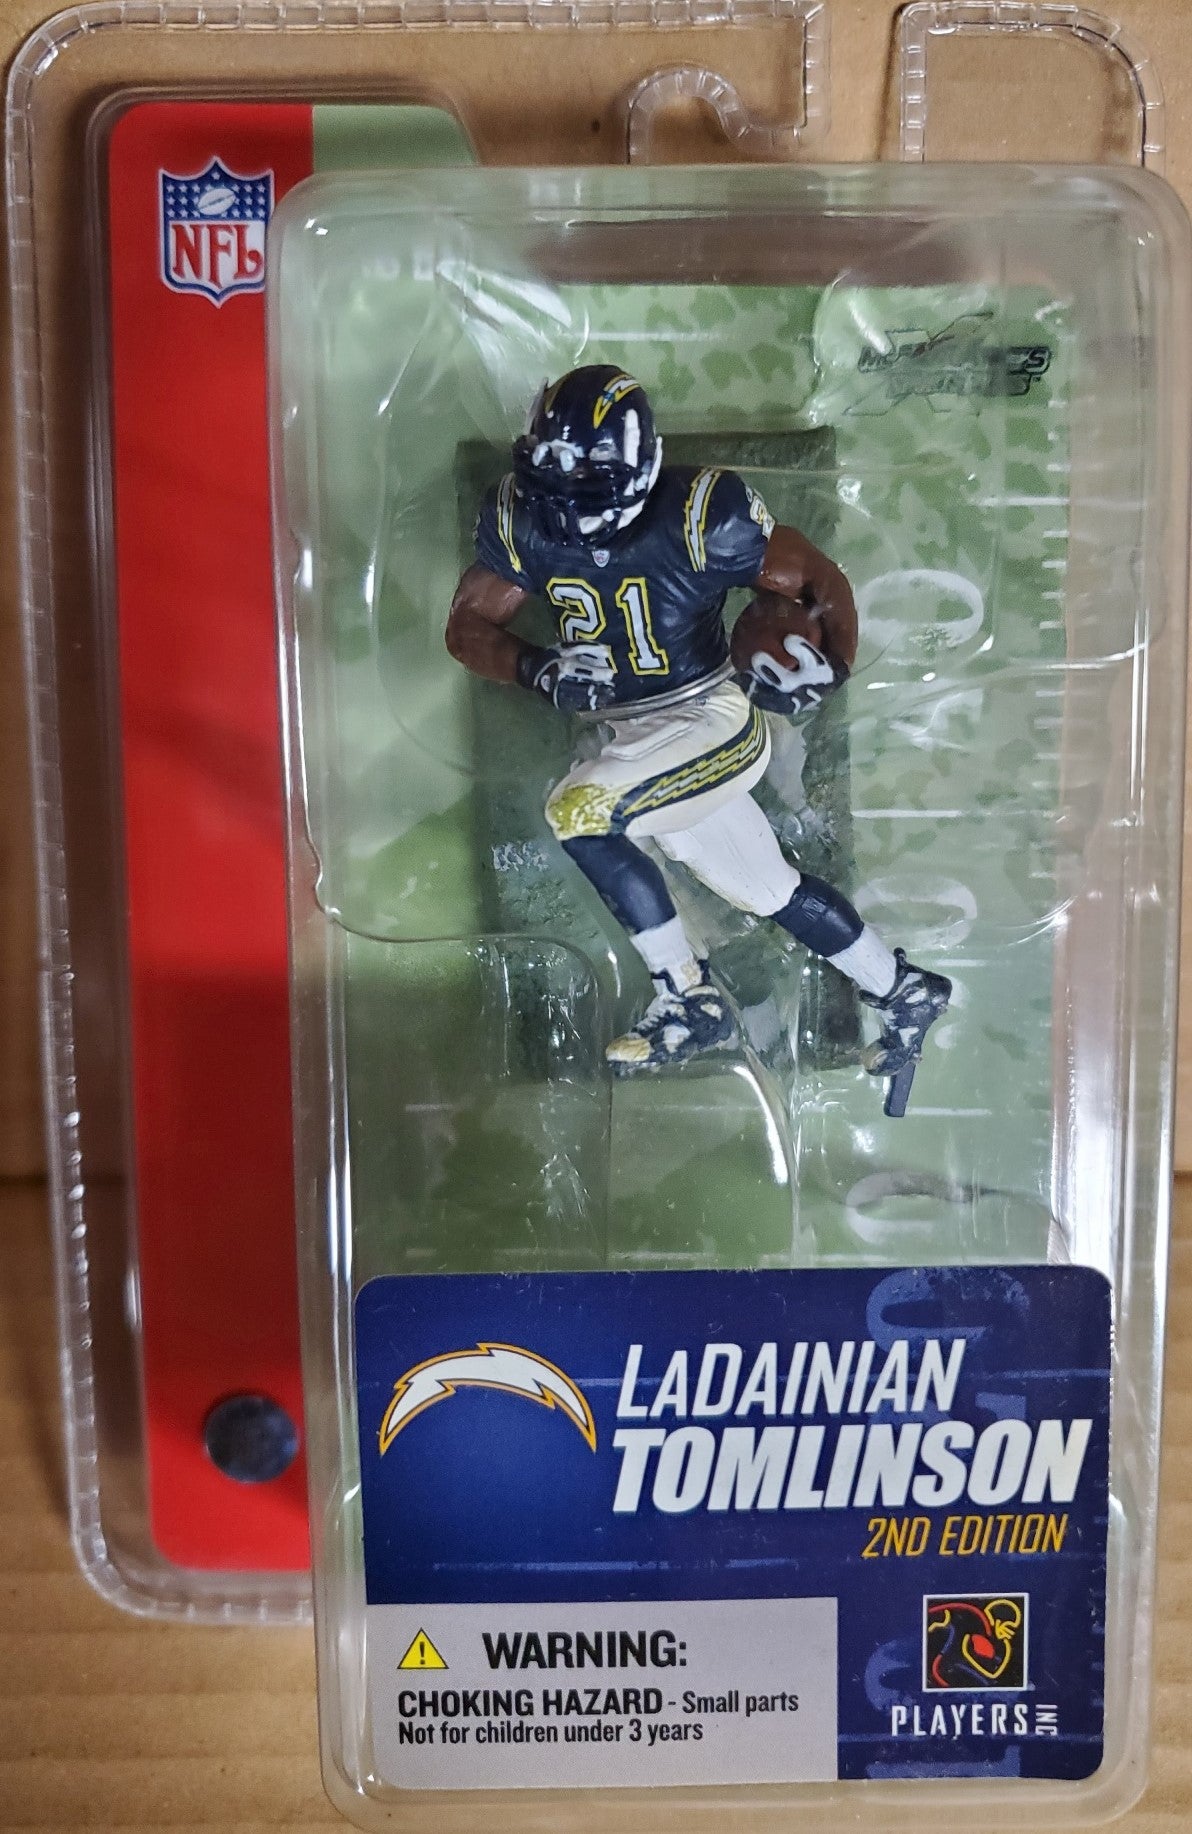 NFL 3 inch LaDAINIAN TOMLINSON action figure (San Diego Chargers)